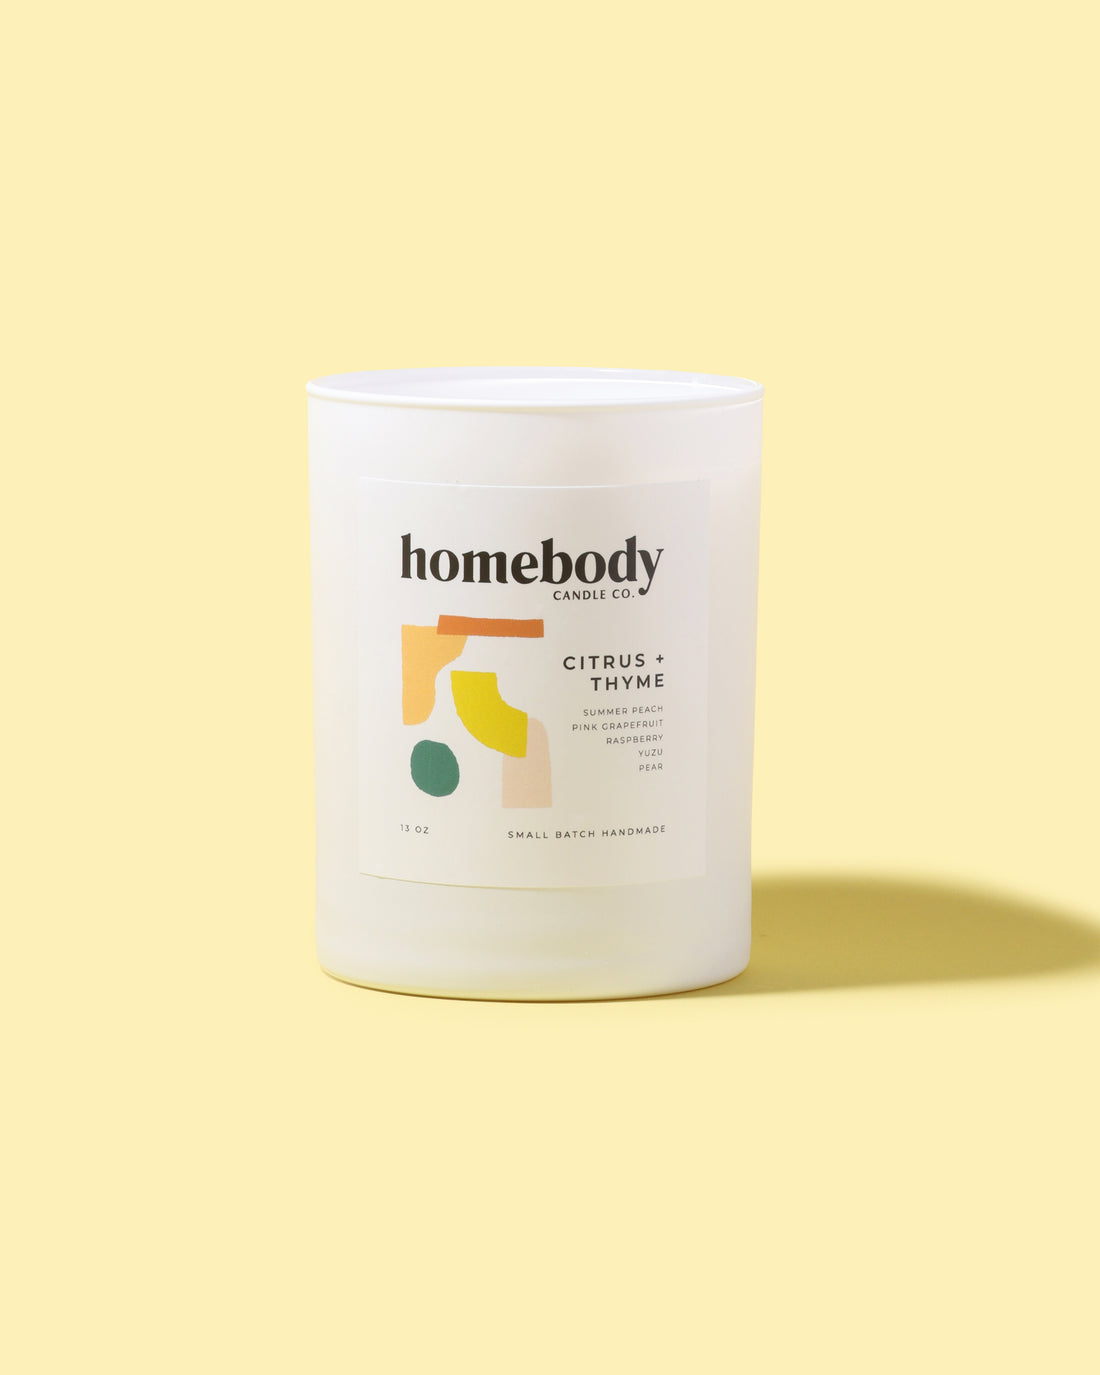 Citrus + Thyme burn + bloom candle Homebody Candle Co